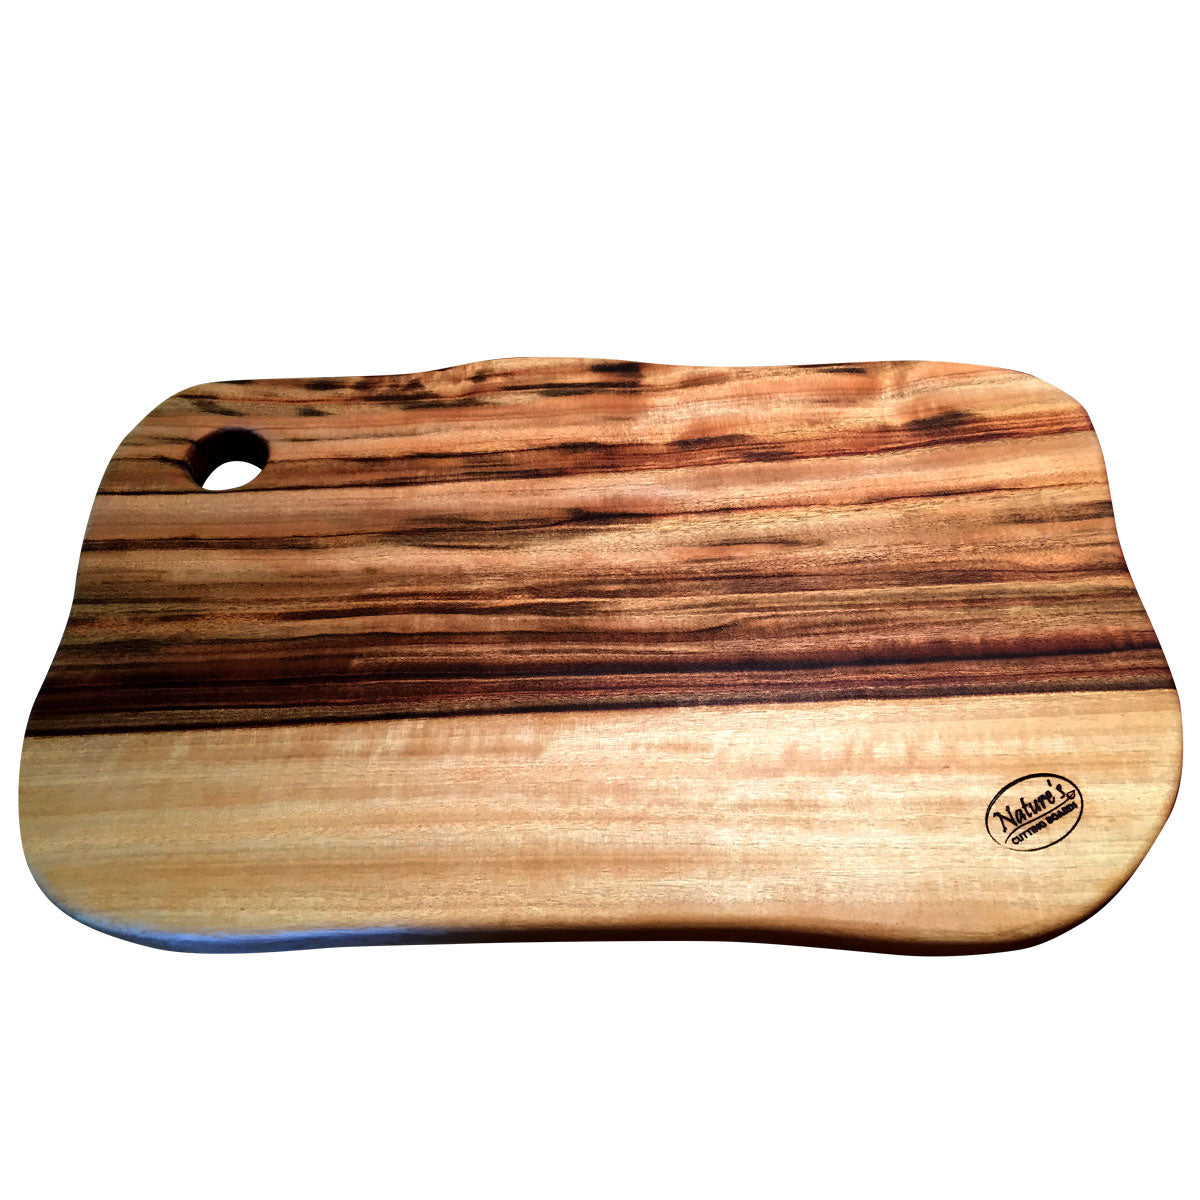 An extra large freeform wooden cutting and chopping board from Nature's Boards, the wood grains and a variety of colours and tones in the camphor laurel timber make and ordinary wooden board stunning.